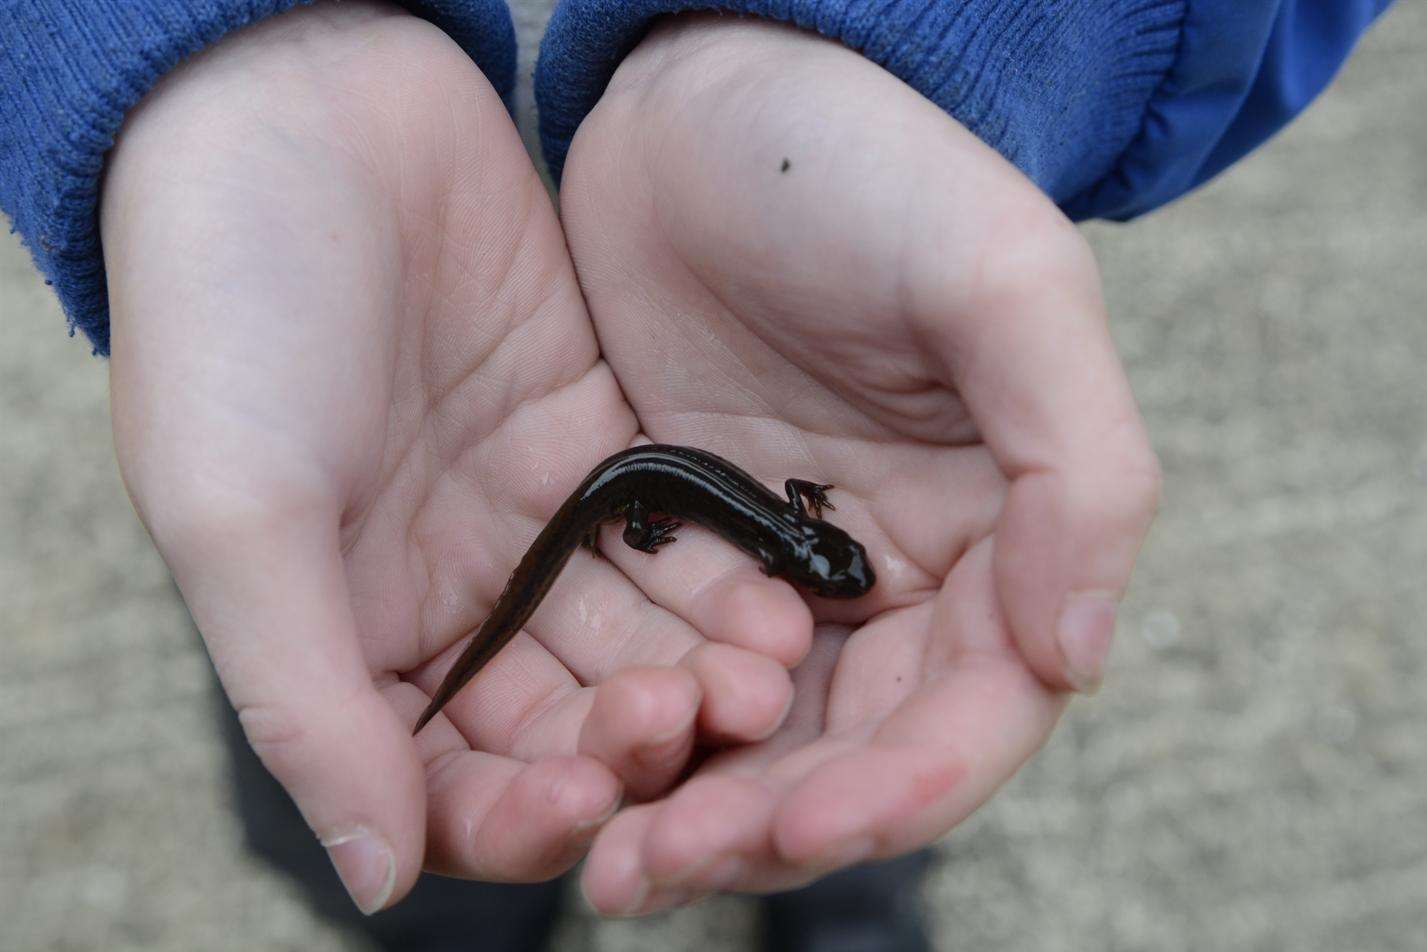 Endangered Great Crested Newts will be relocated as part of the project